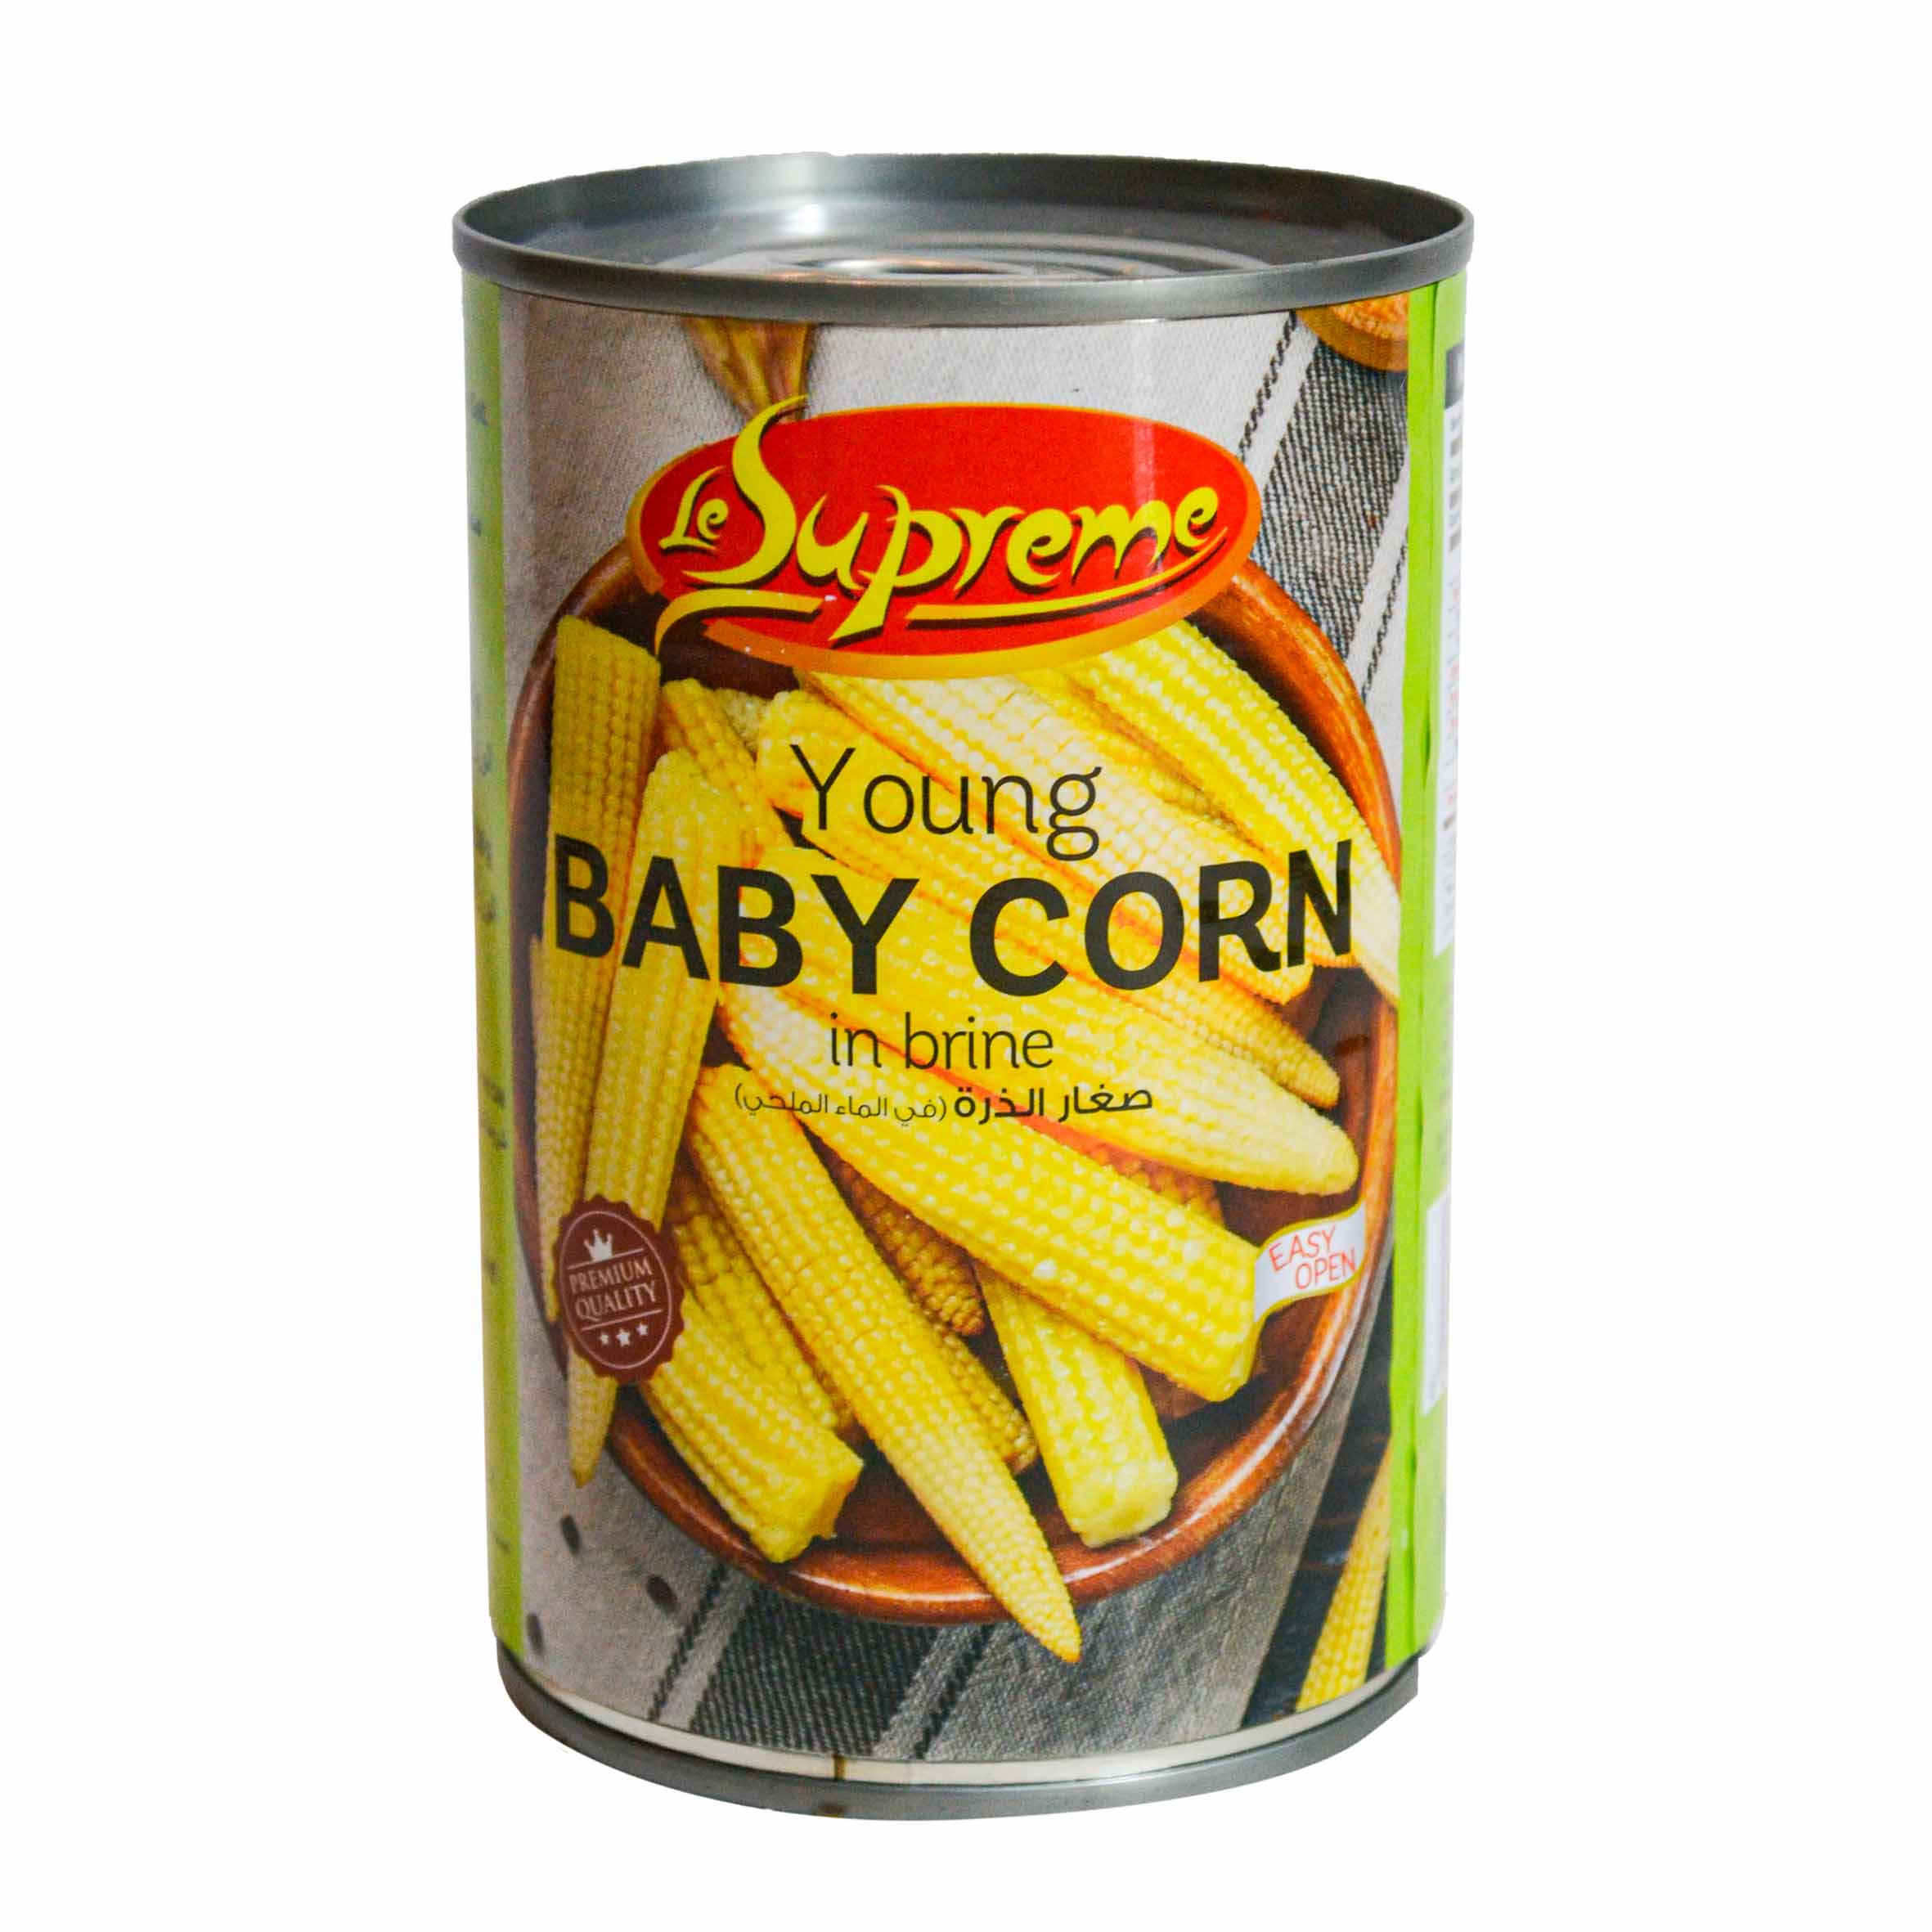 Baby corns are used as snacks,425 gm